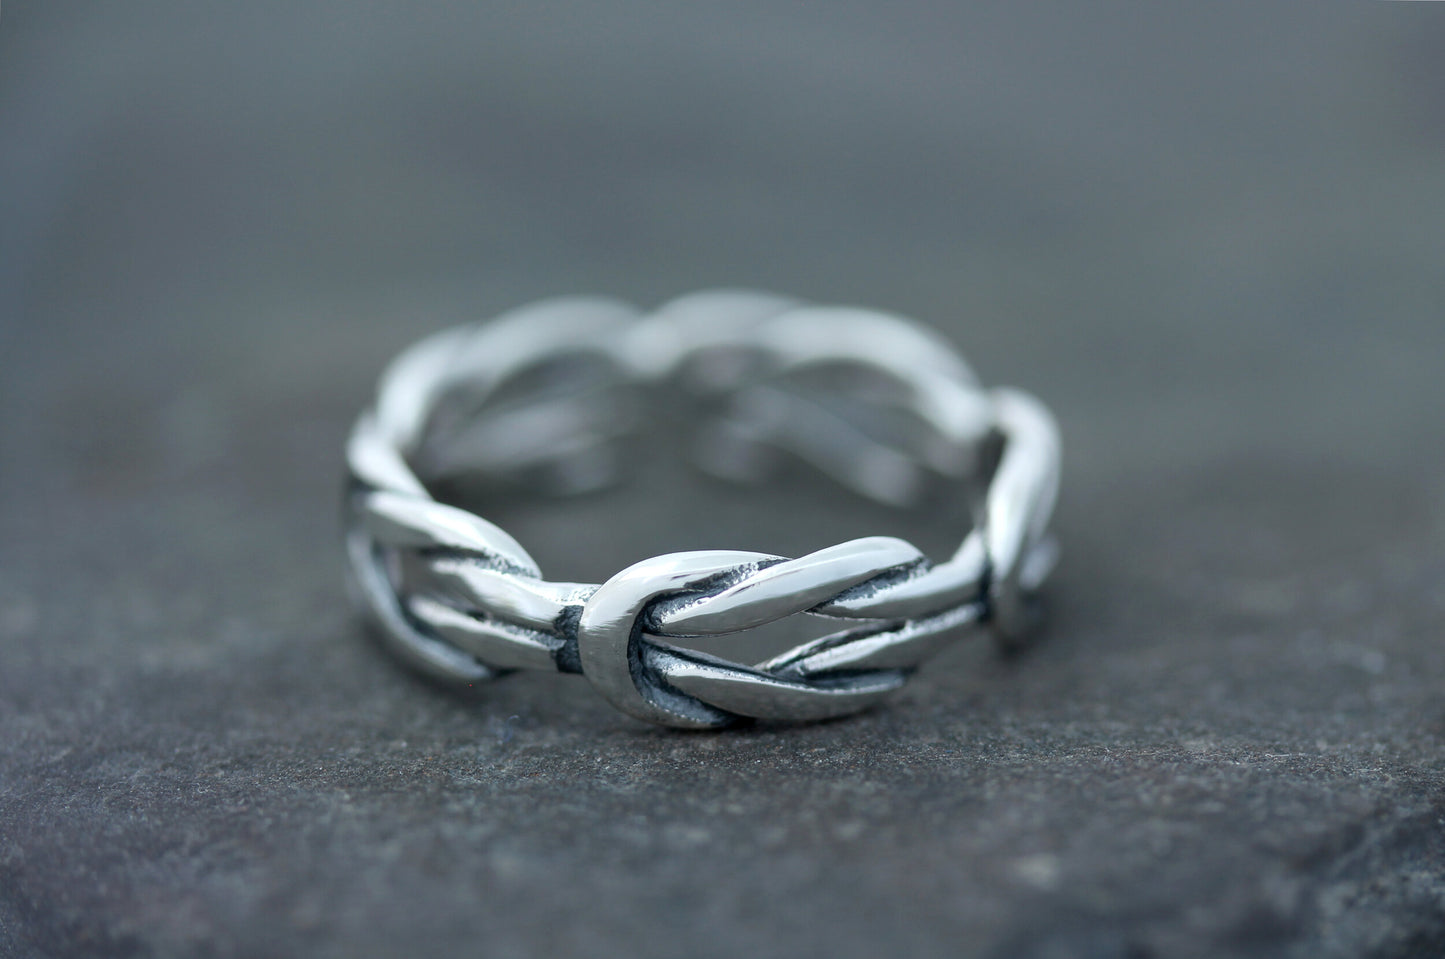 Celtic Knot Ring - Eternal Knot Band